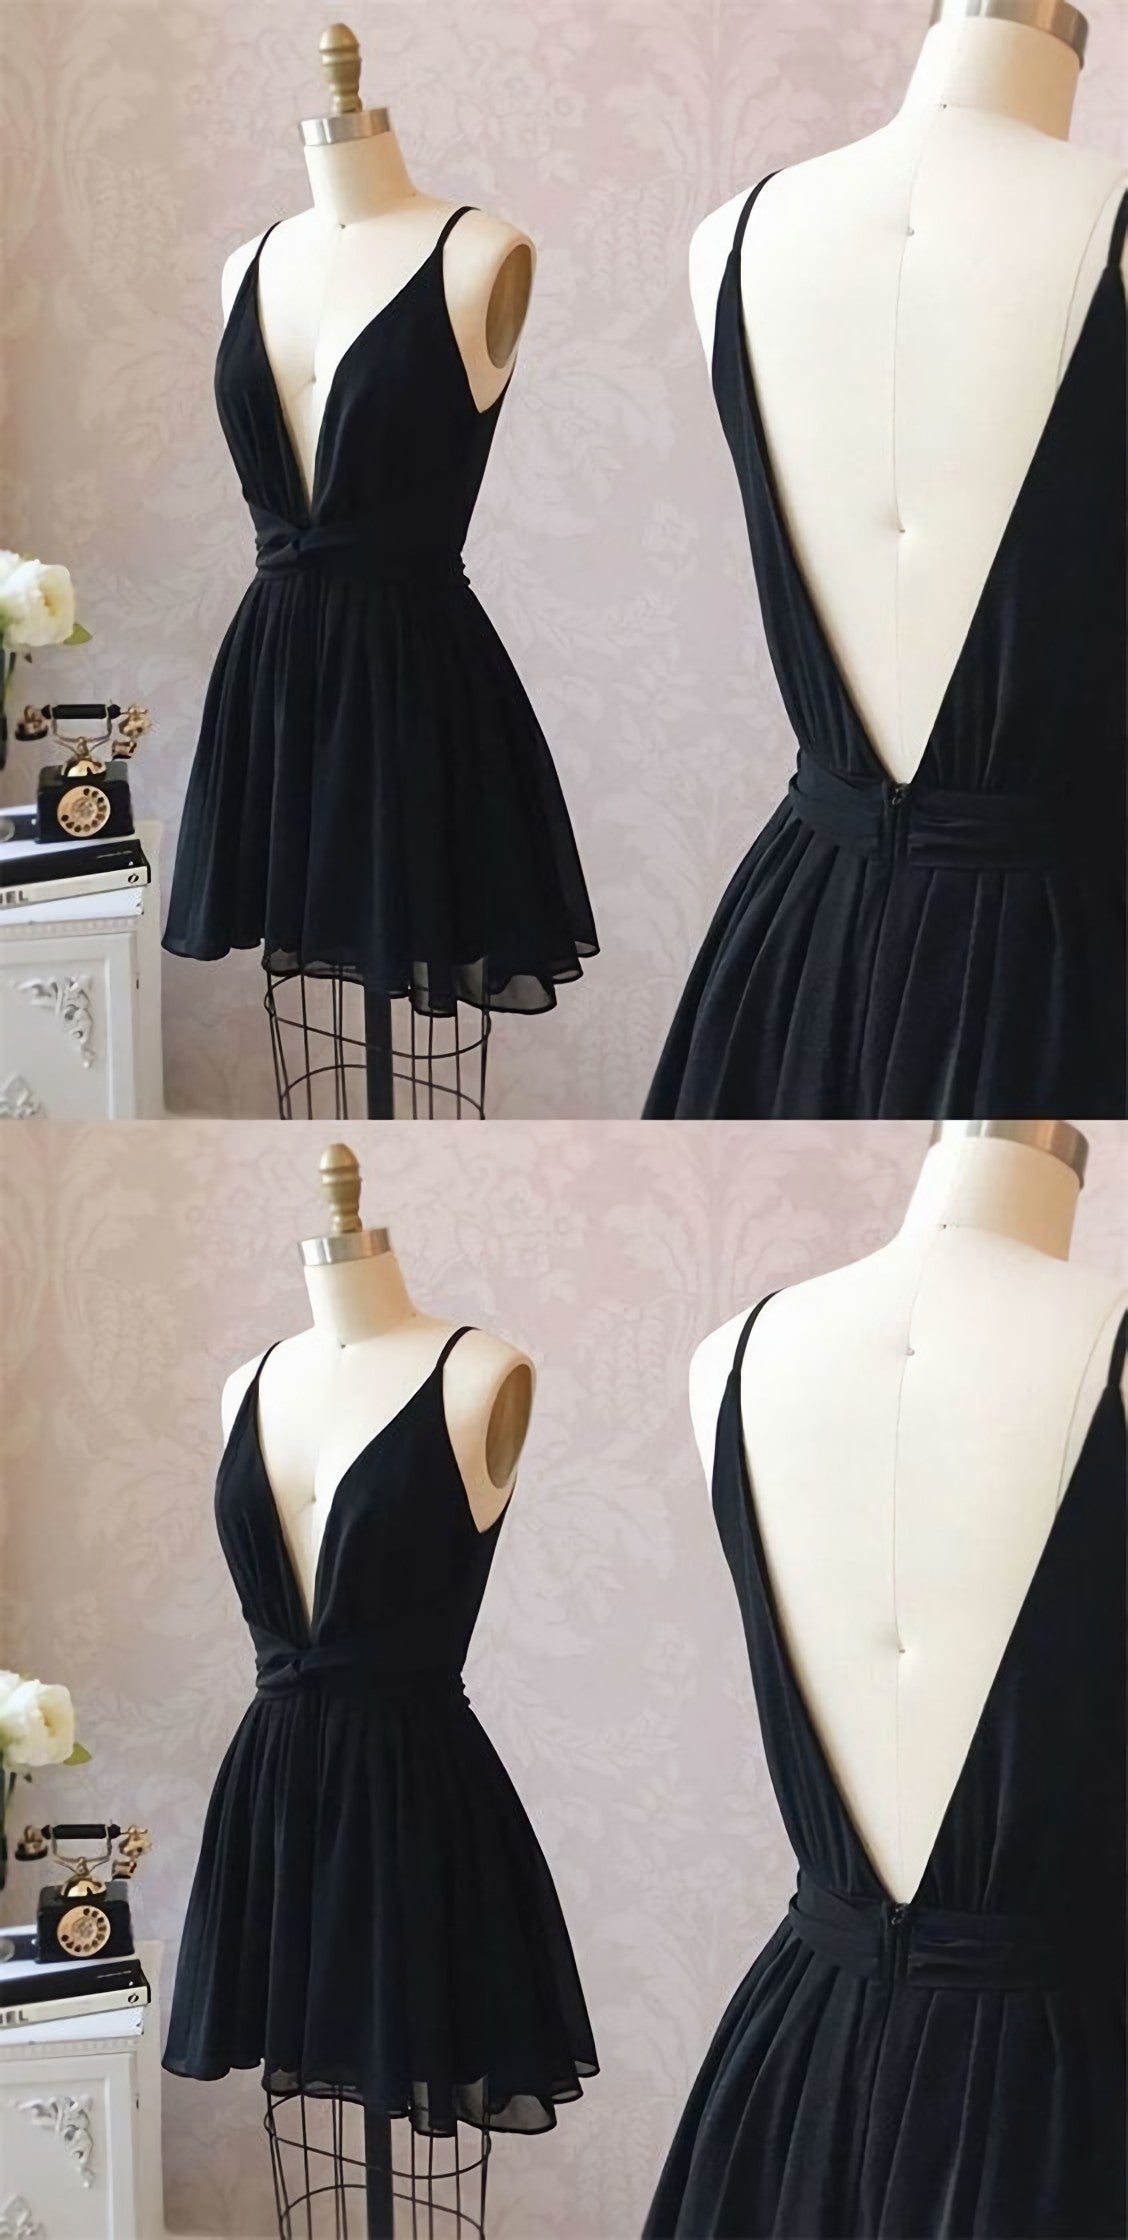 Cute Black Chiffon Short Little Black Corset Homecoming Dresses outfit, Formal Dress With Sleeve